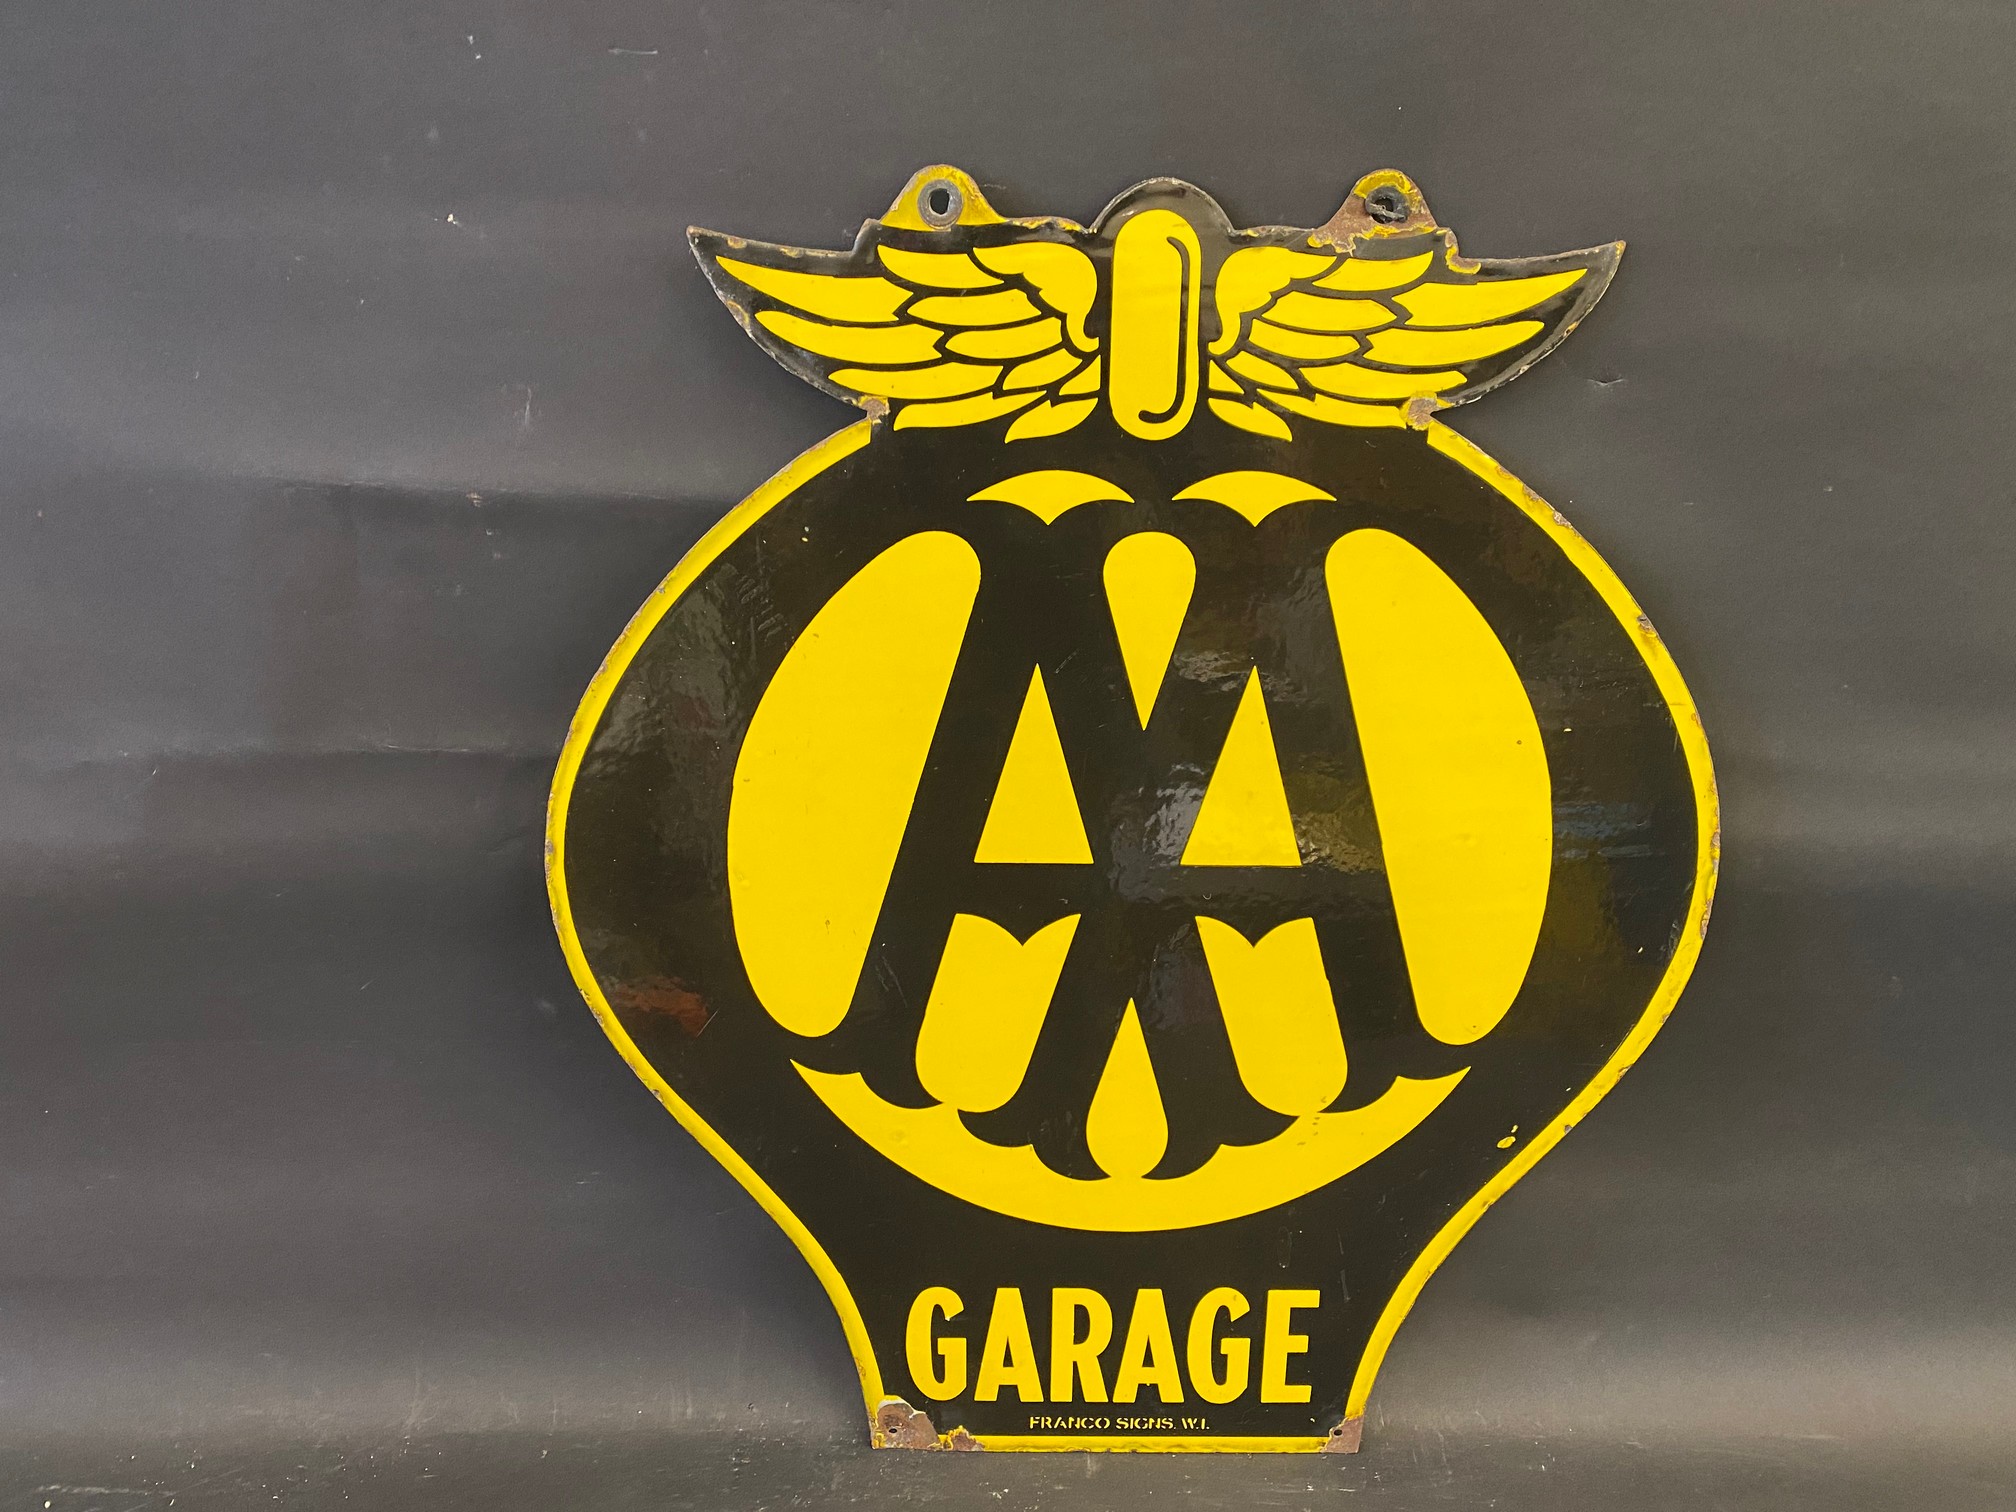 An AA Garage double sided enamel sign by Franco, 22 x 25".